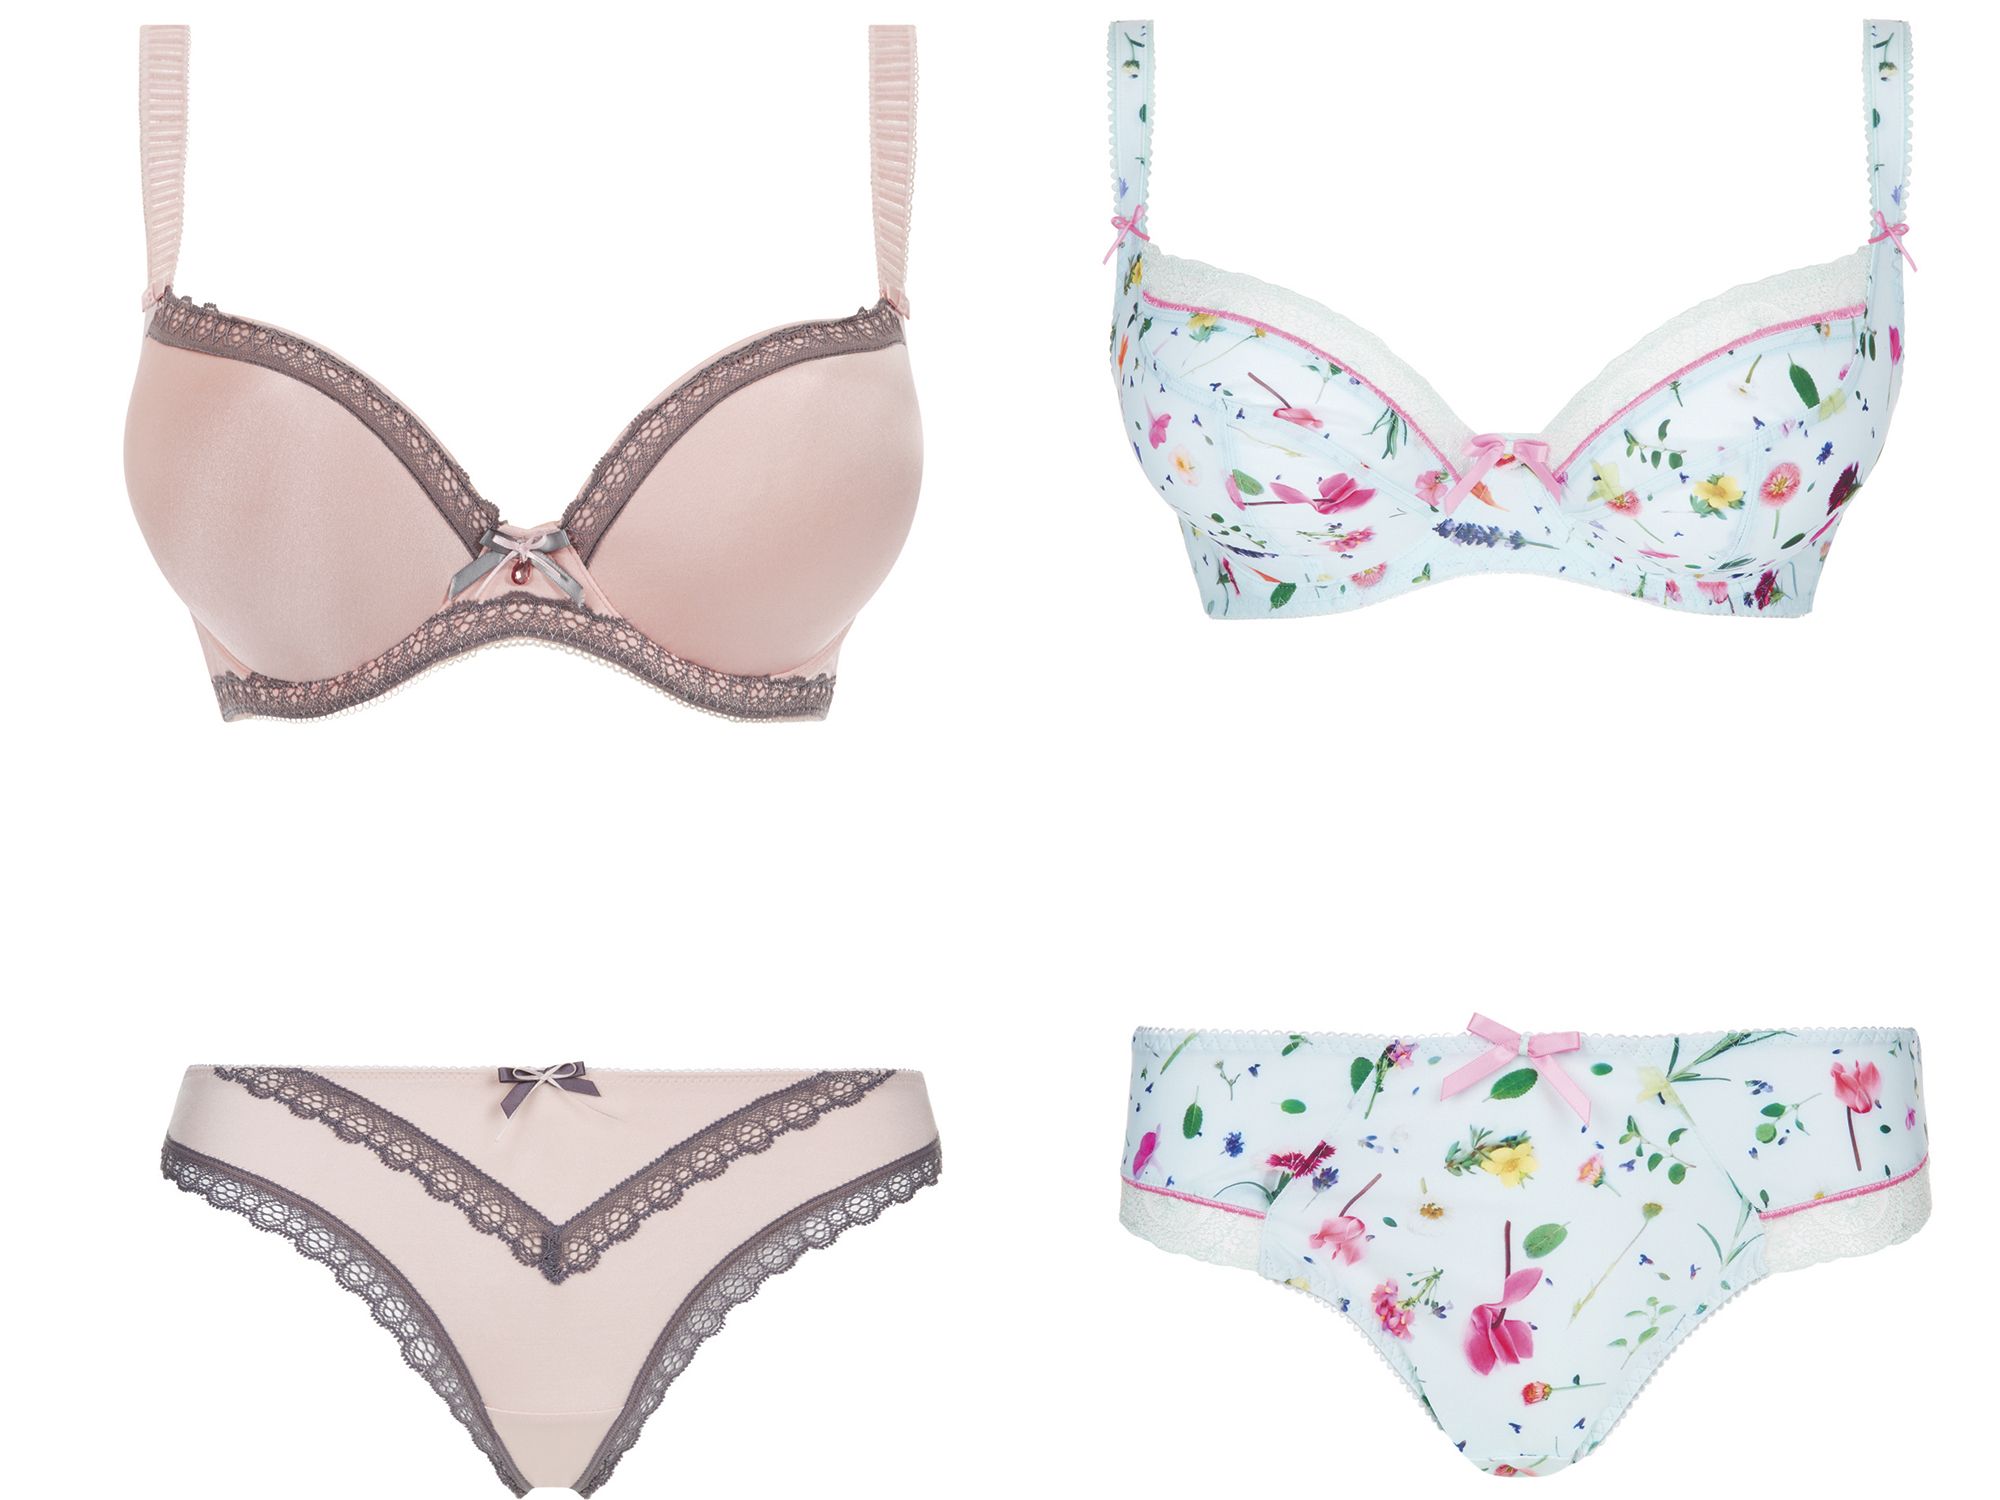 How to pick lingerie to suit your shape/body type